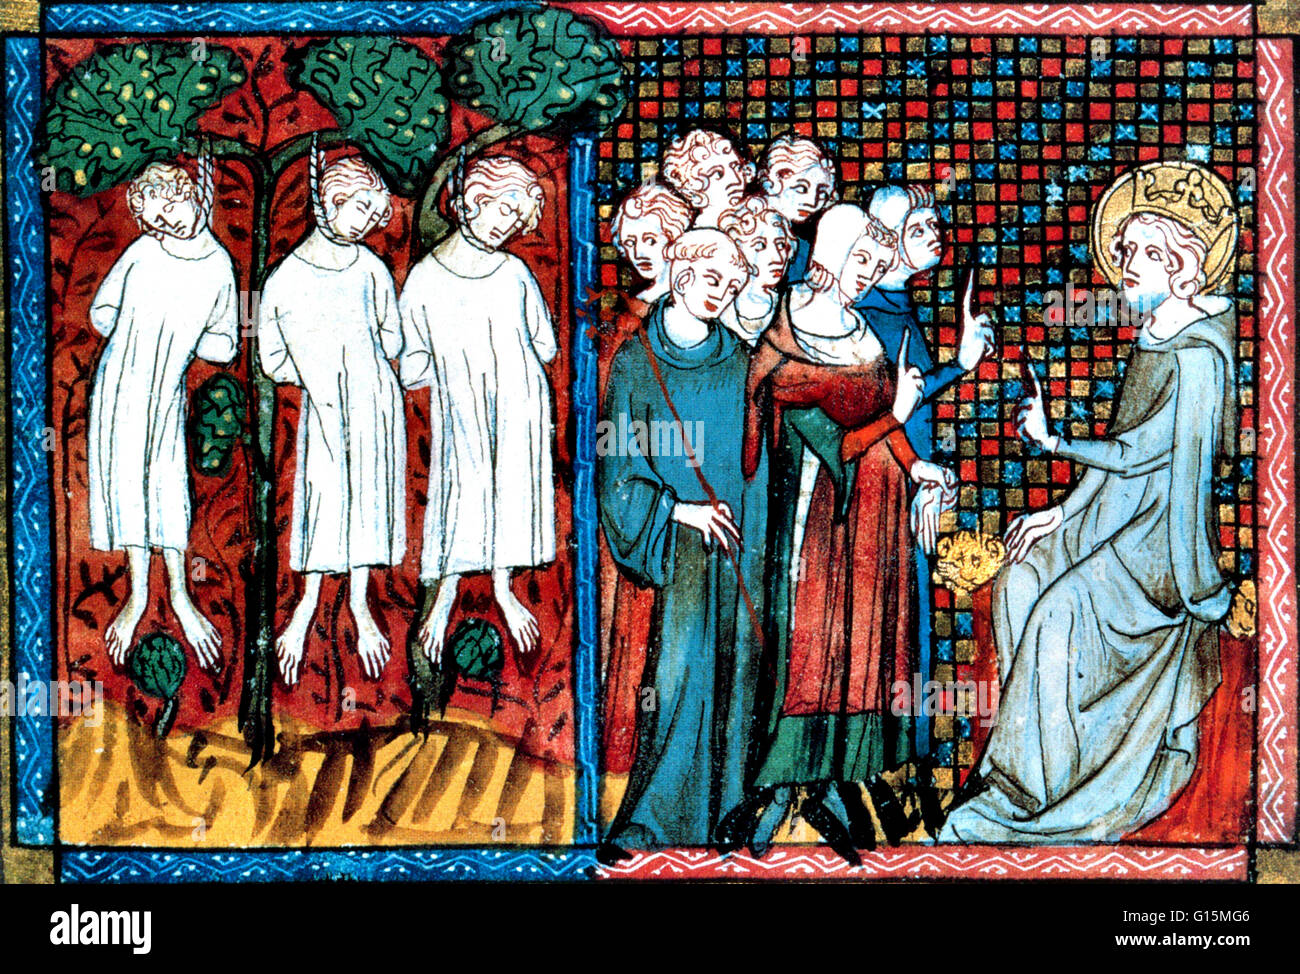 King Louis IX of France passes judgement when the Abbot of Saint Nicholas-au-Bois accuses a knight (Enguerrand De Coucy) of wrongly hanging three young men. From a French illustration of 1330. Louis IX (April 25, 1214 - August 25, 1270), commonly Saint Lo Stock Photo